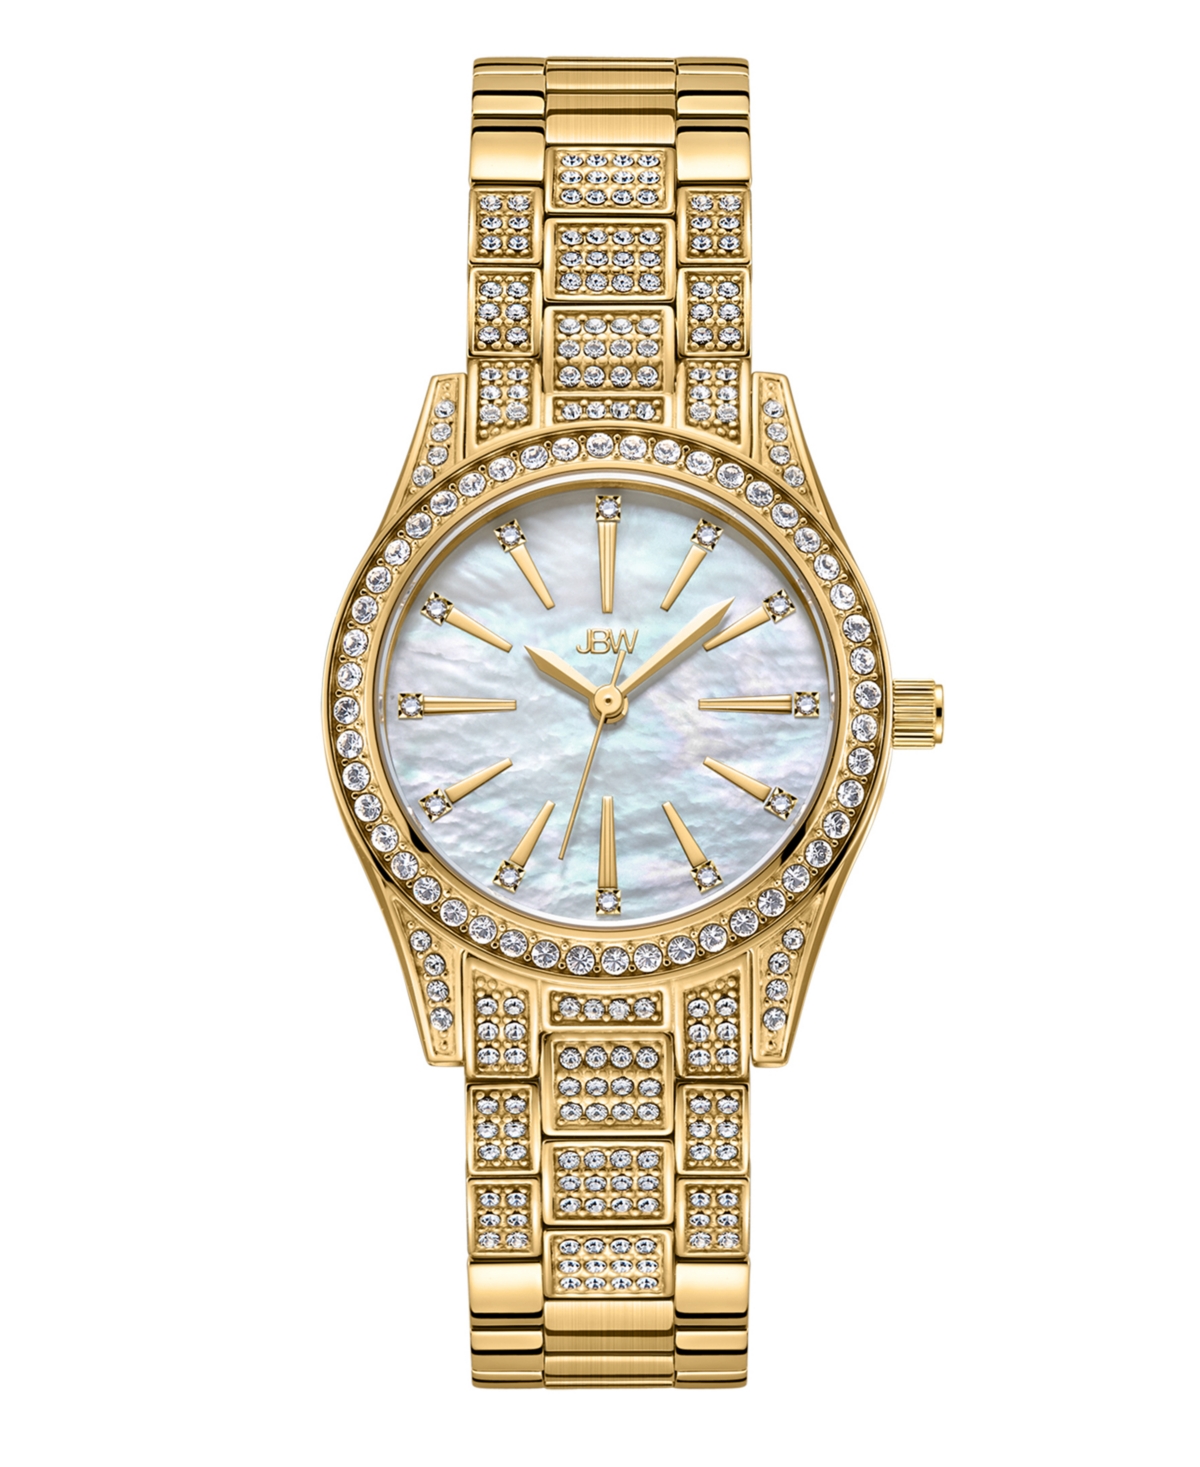 Jbw Women's Cristal Spectra 18k Gold-plated Stainless Steel Diamond Watch, 28mm In Mother Of Pearl / White